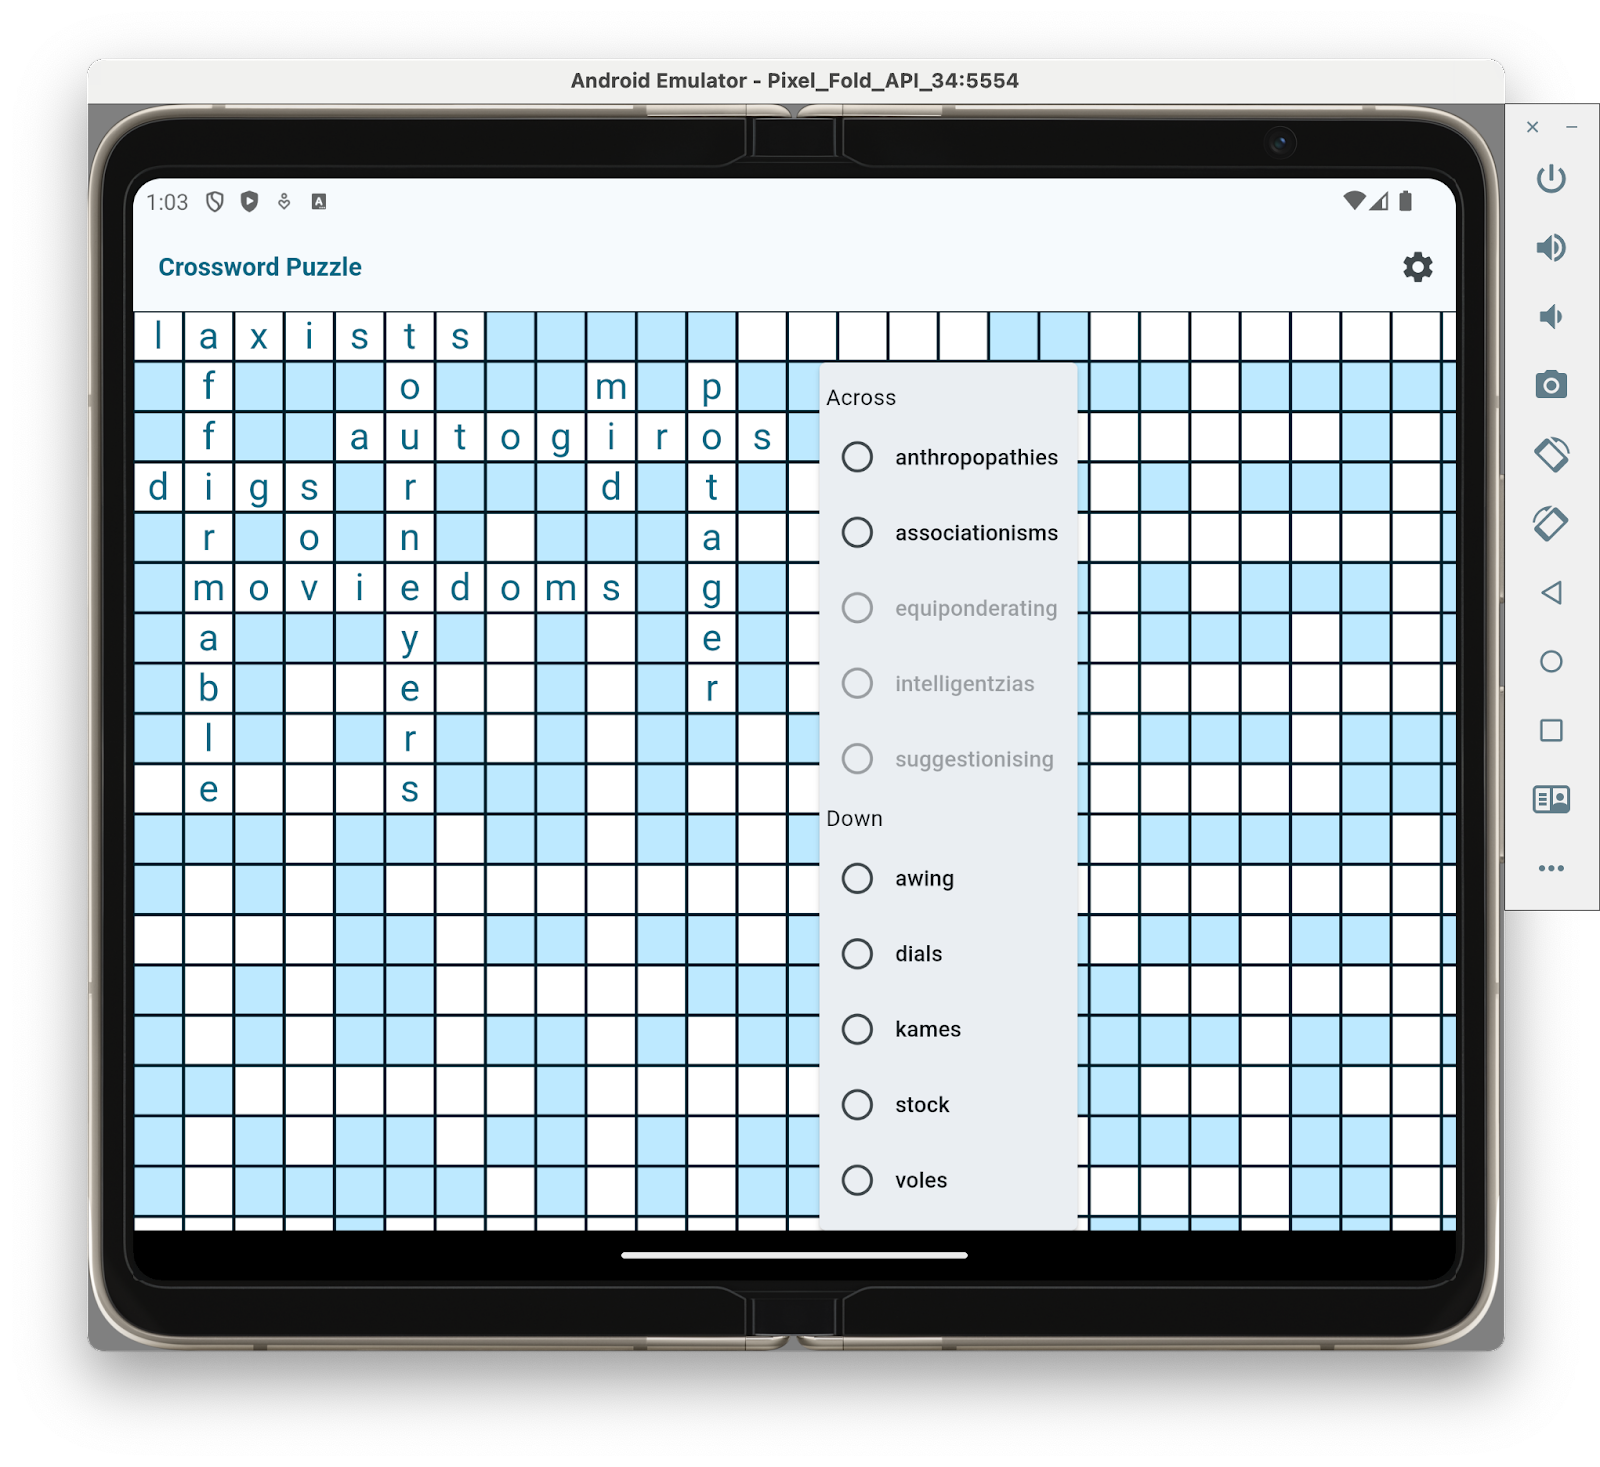 Screen shot of a Crossword Puzzle in the process of being solved on a Pixel Fold emulator.